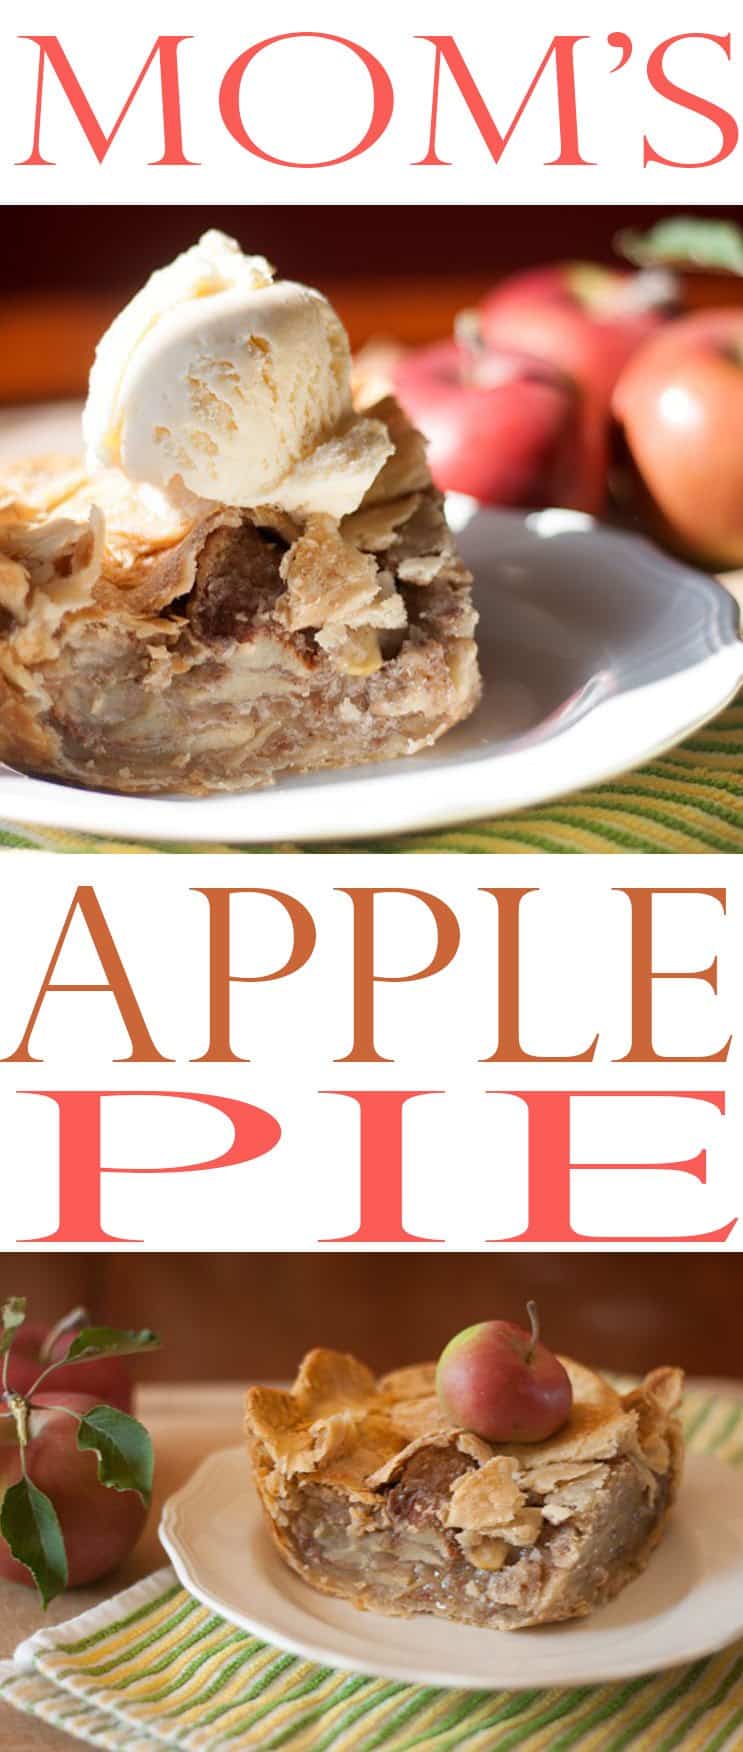 Easy Apple Pie Recipe makes this comfort food fall favorite a breeze to make when company is coming over. No hassle apple pie recipe is perfect for the new baker.